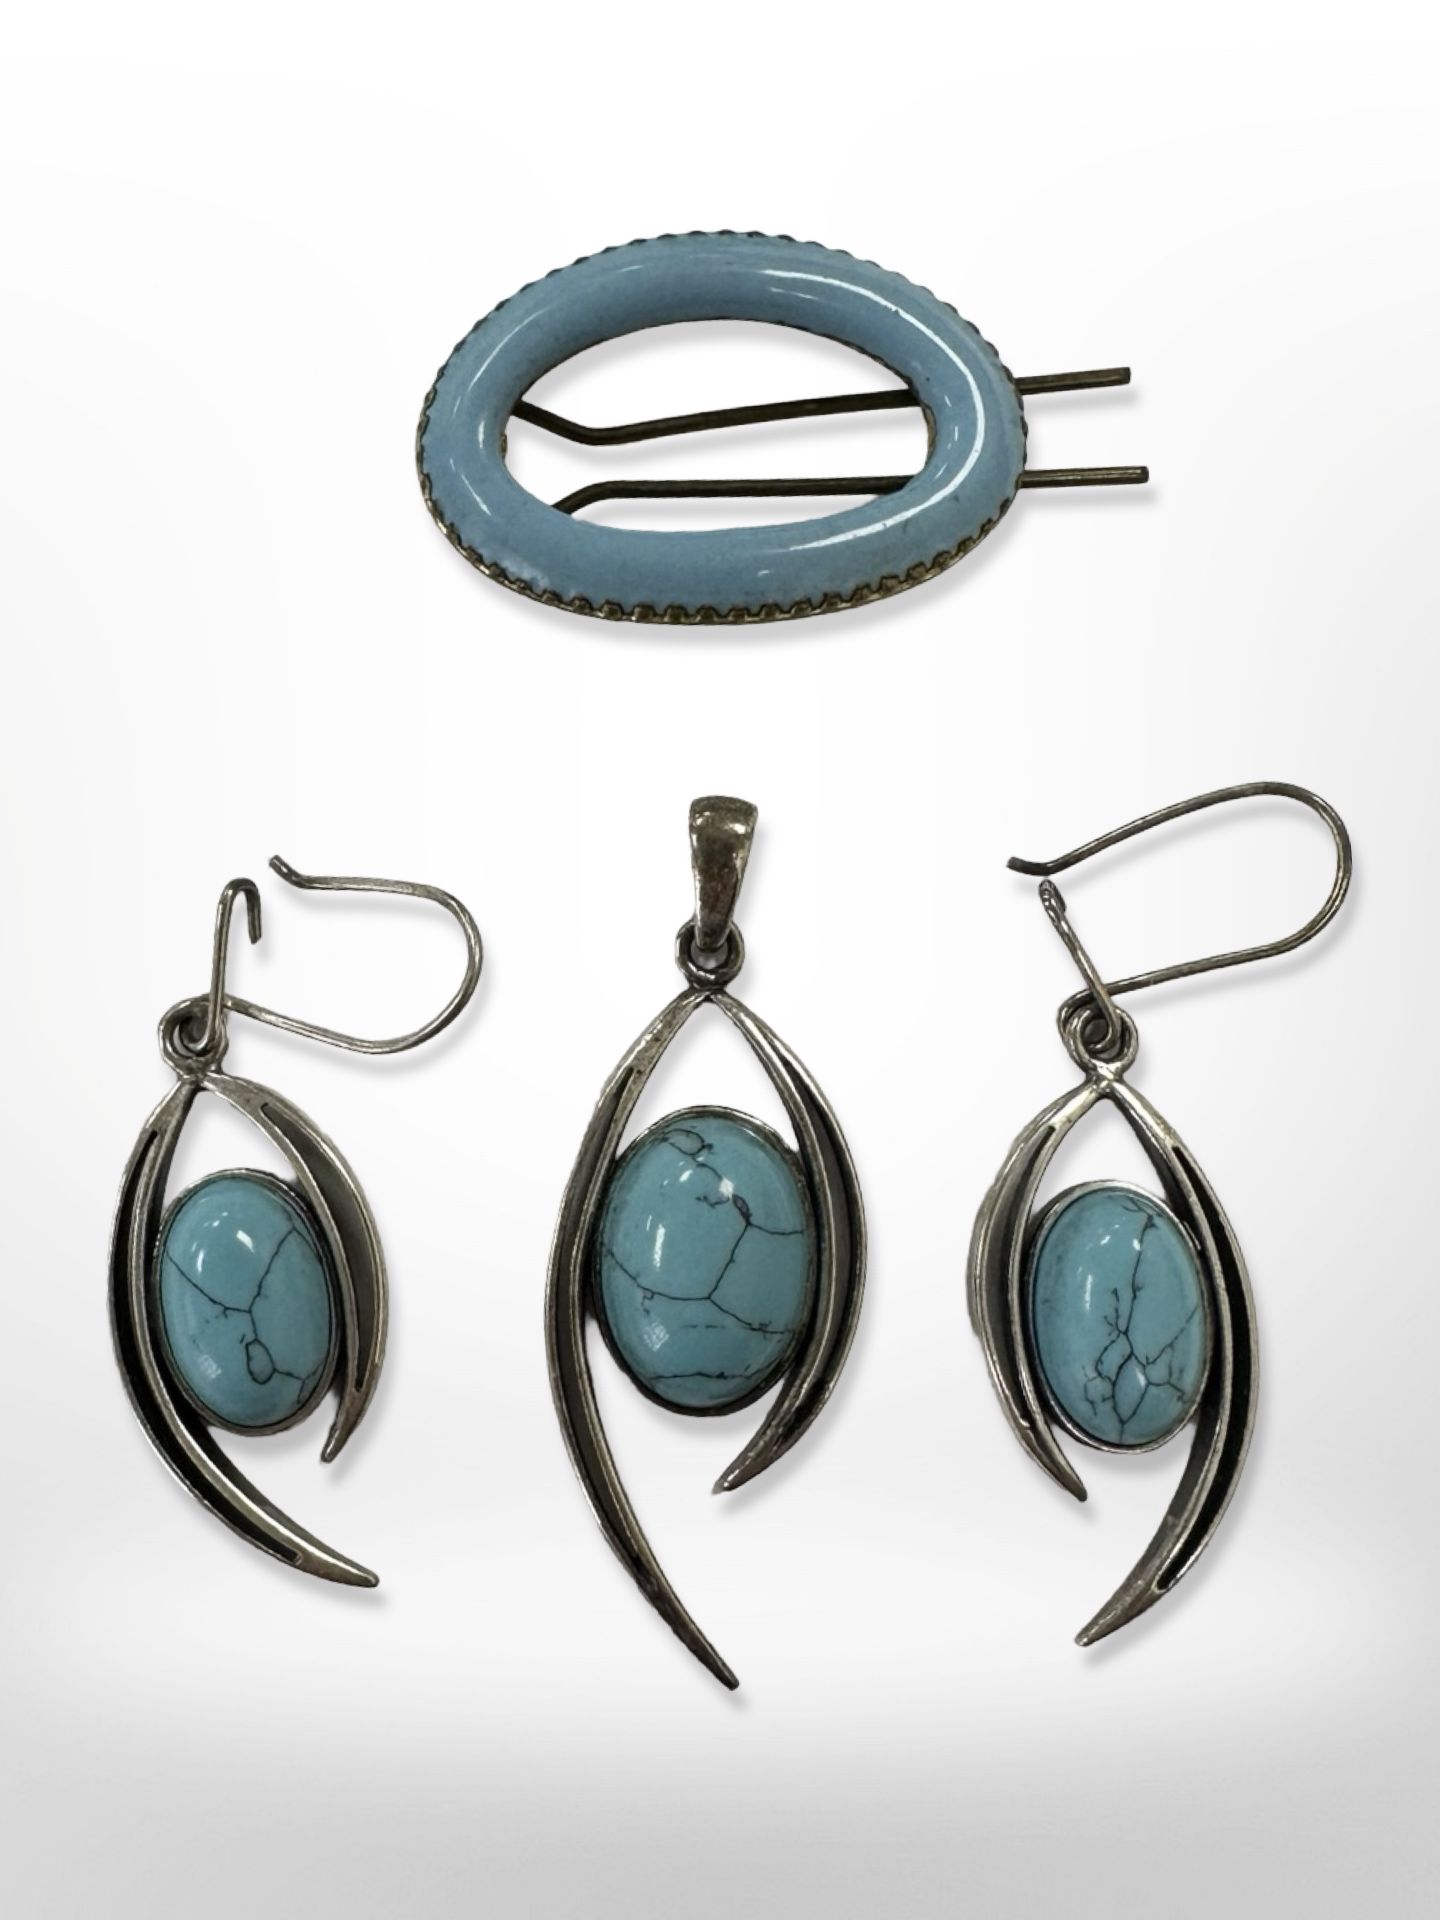 A silver and faux turquoise pendant, matching earrings,